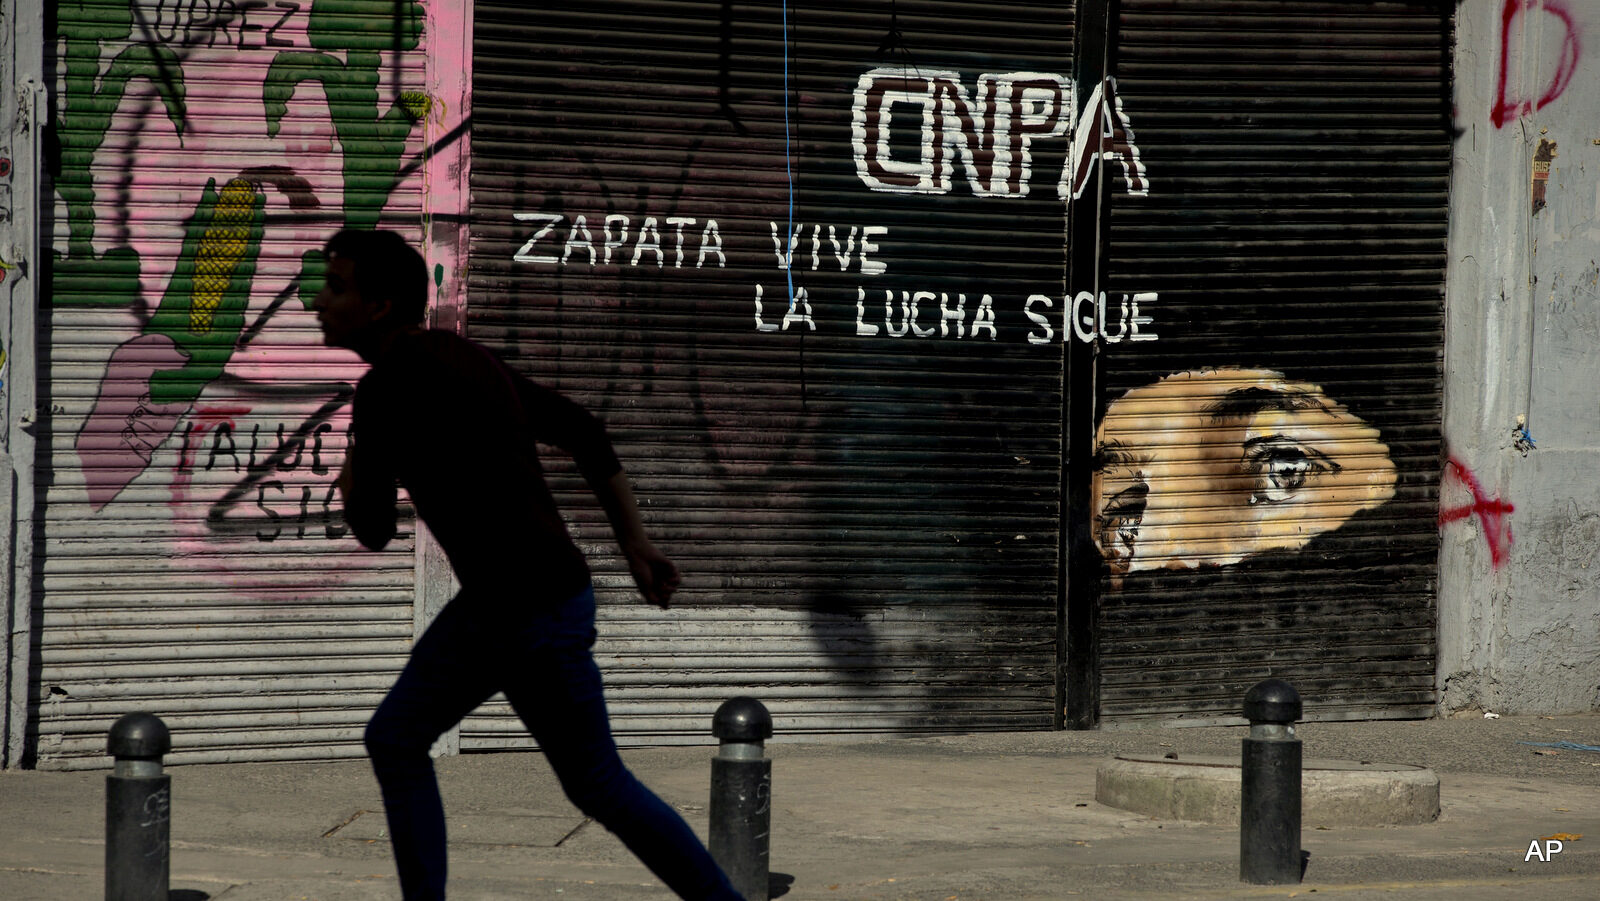 A boy runs past a mural of rebel leader Sub Comandante Marcos with the slogan in Spanish "Zapata lives. The struggle continues," in Mexico City, Wednesday, June 22, 2016. A group of protesting teachers accompanied by a mediation commission were meeting Wednesday evening with Interior Secretary Miguel Angel Osorio Chong. The negotiations between the striking radical teachers and the government come three days after a clash between protestors and police in Oaxaca state left eight dead and more than 100 injured.